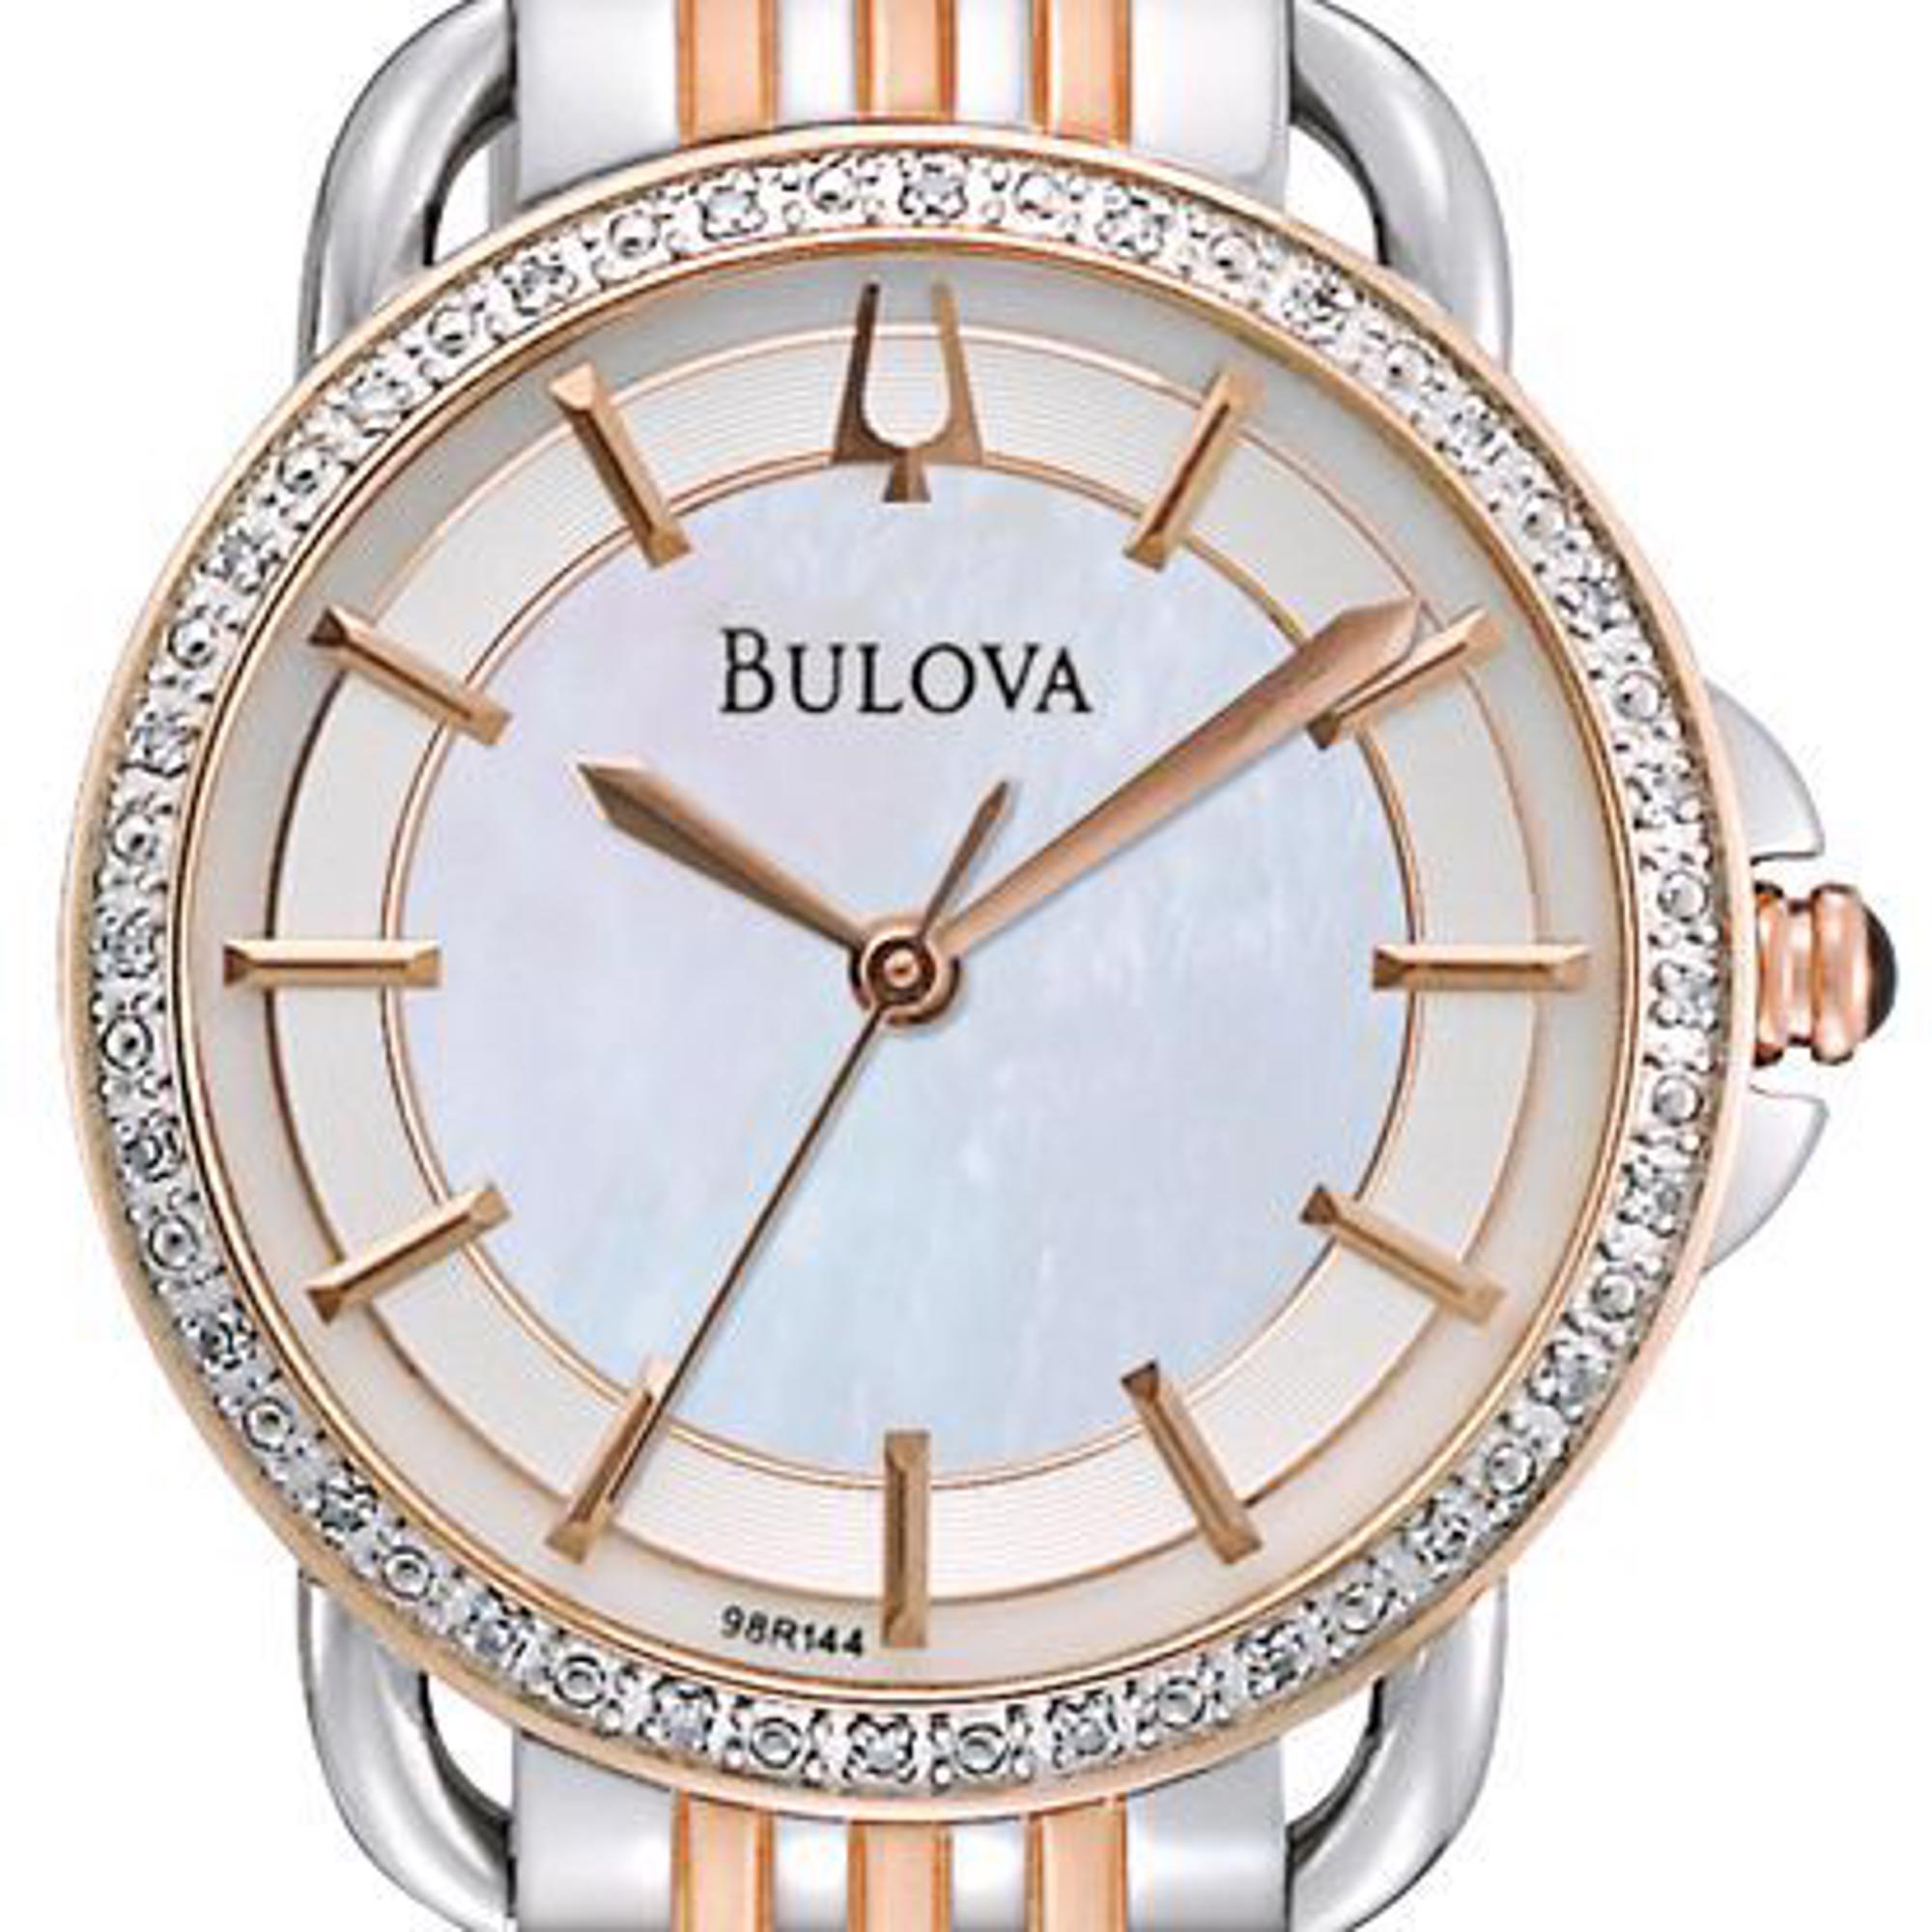 Pre-owned Bulova Two Tone Steel Diamond MOP Sticks Dial Ladies Quartz Watch 98R144 Minor Discoloration on the Gold-Tone Bracelet and Scratches from Handling. This Beautiful Timepiece is Powered by a Quartz Movement and Features: Stainless Steel Case